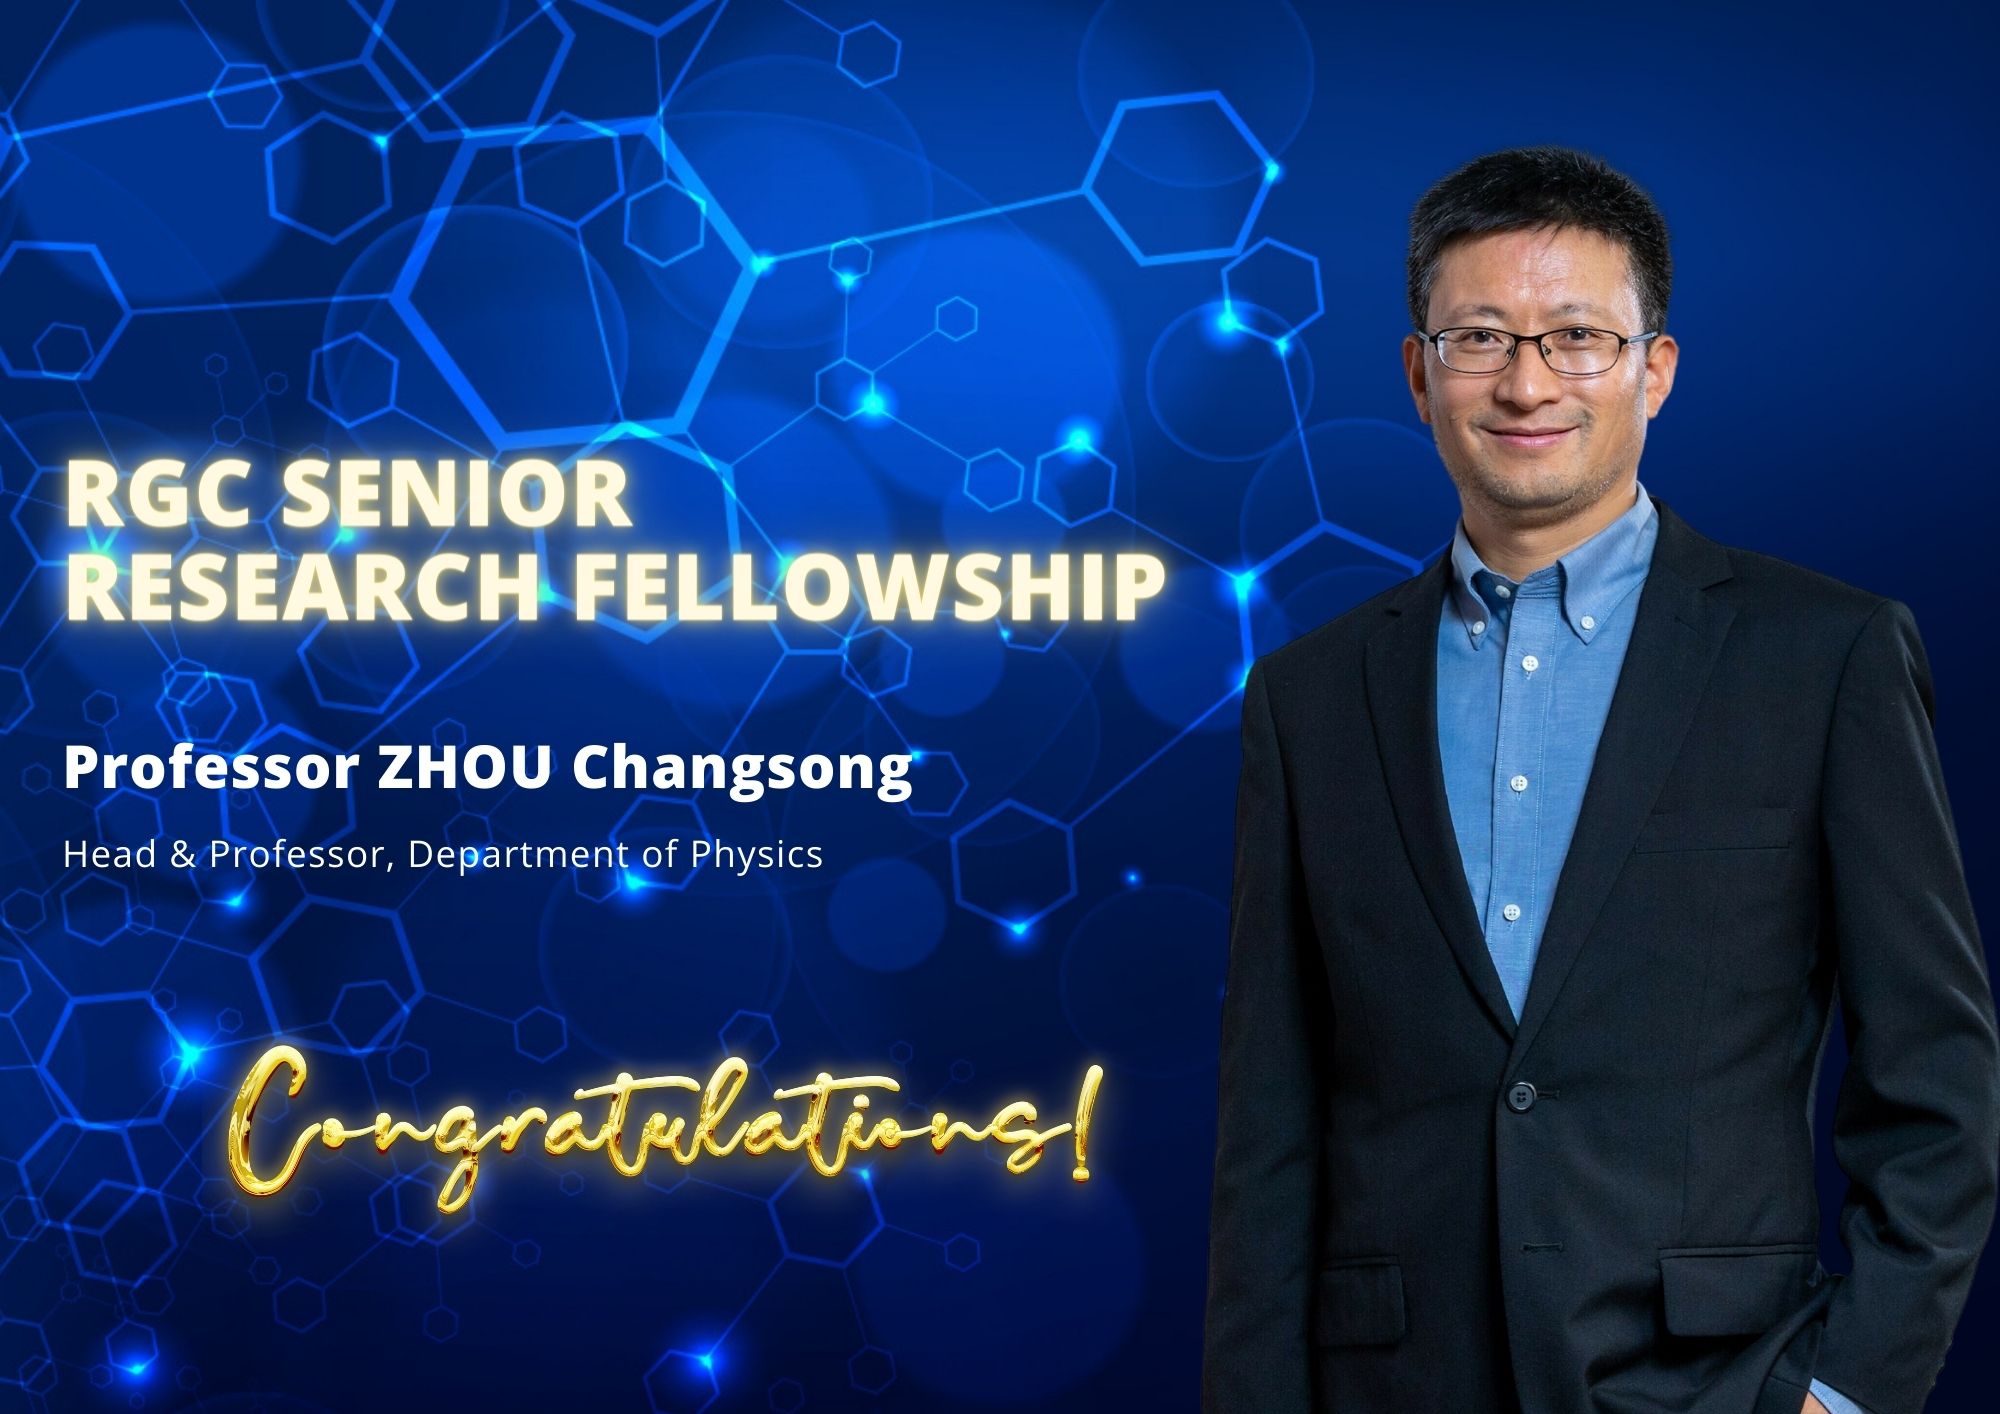 Prof. Changsong ZHOU, Head and Professor of the Department of Physics, has been conferred the title “RGC Senior Research Fellow” in the inaugural Research Grants Council (RGC) Senior Research Fellow Scheme (SRFS). HKBU will receive a fellowship grant of around HK$7.8 million over a period of 60 months.        The RGC SRFS was introduced to provide sustained support to exceptionally outstanding academics to facilitate their research and promote research excellence. The ten SRFS awardees were selected for their research capability, contribution and potential impact of the proposed research project, proven research track record, leadership quality and vision in the chosen area of research. Prof. Zhou is one of the two SRFS awardees from the Faculty of Science. His project aims to build a new theoretical framework based on large-scale brain network model to identify effective strategies for modulating neurocognition and treating neuropsychiatric disorders, test the strategies in data-driven computational models of individual brain and validate in neuroimaging experiments. The selection panel was of the view that the proposed project would have translational value especially in a clinical setting.